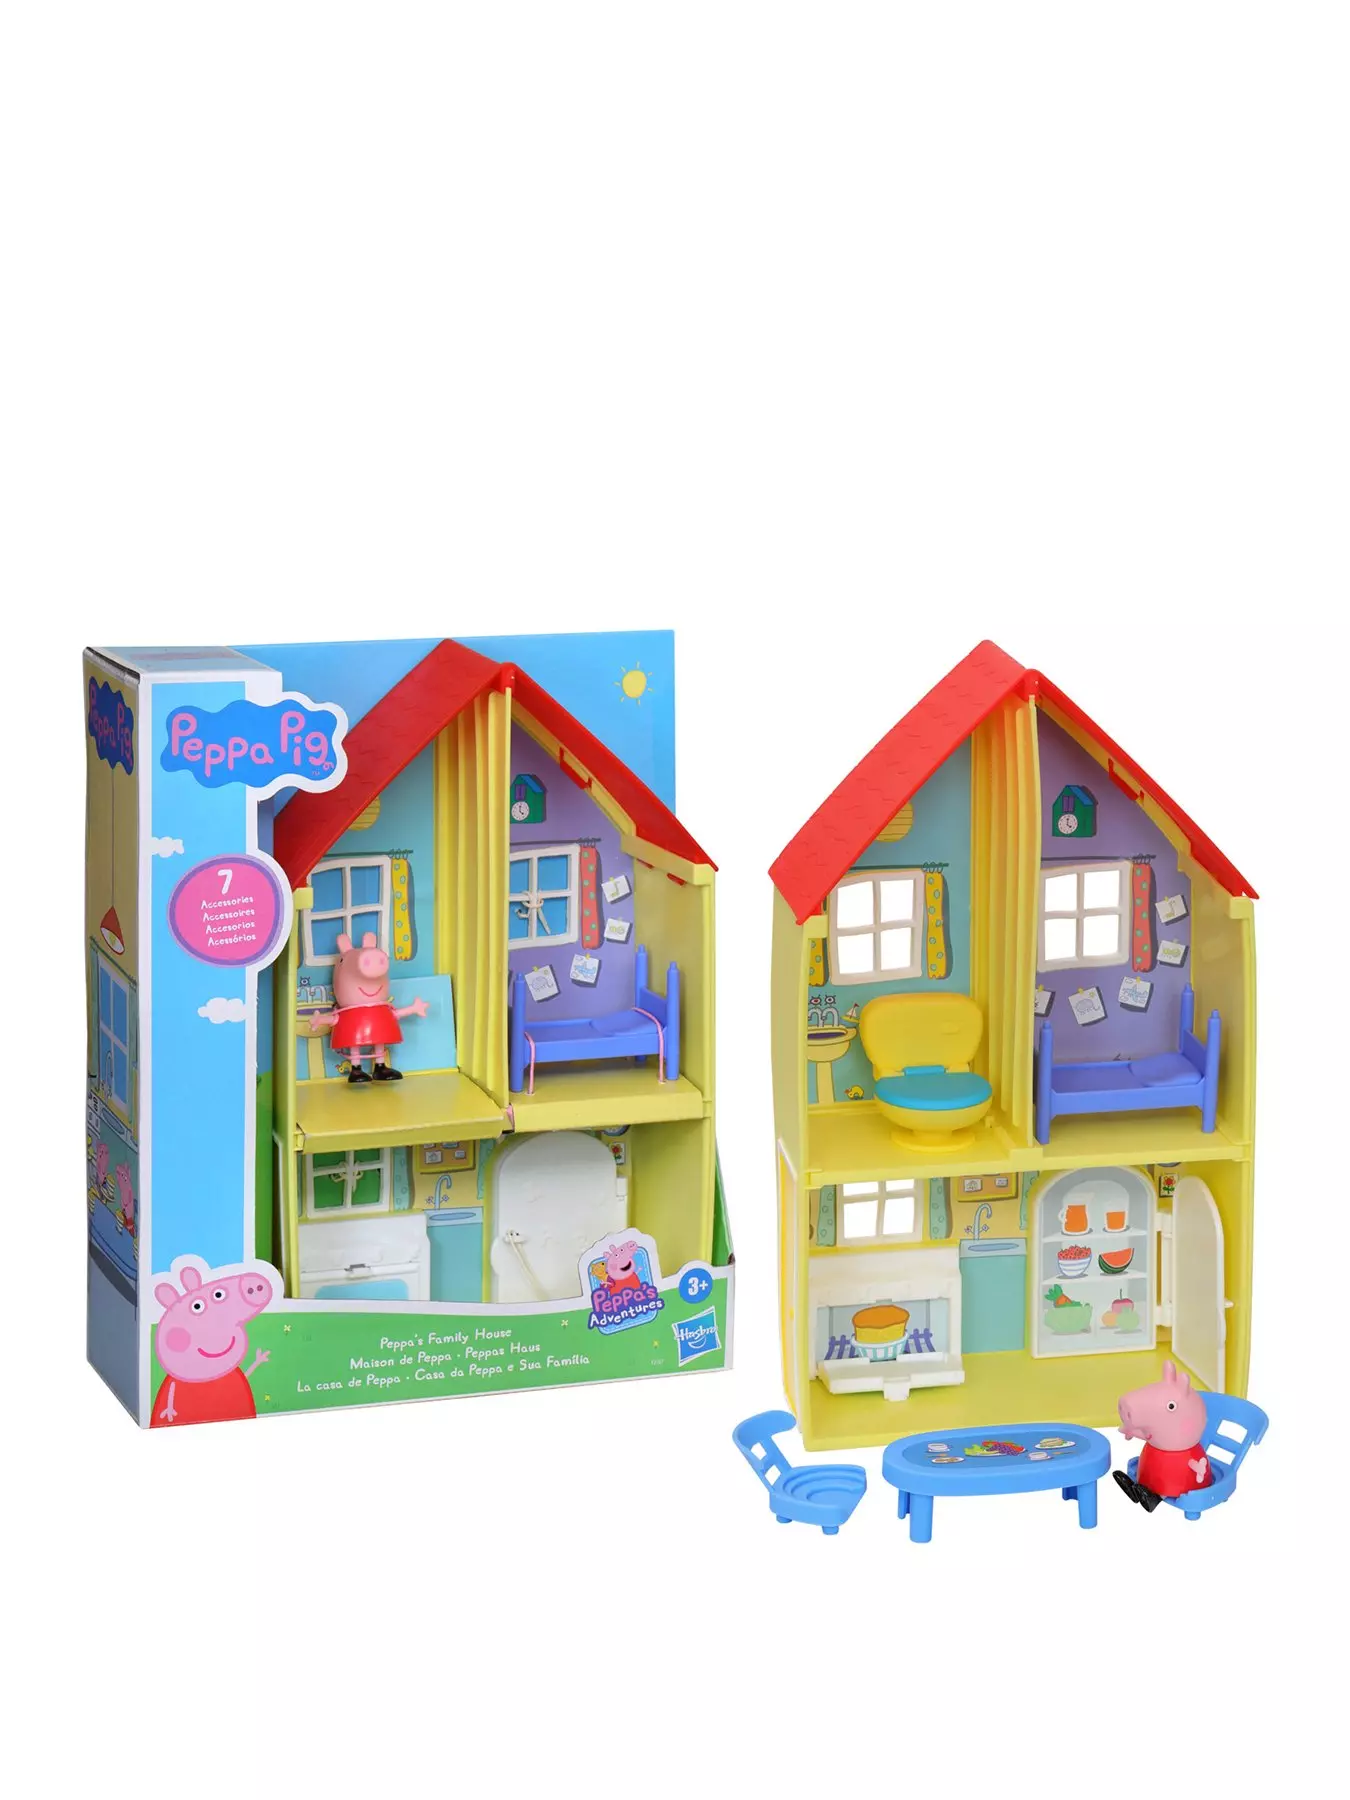  Peppa Pig Peppa's Adventures Grandpa Pig's Cabin Boat Vehicle  Preschool Toy: 1 Figure, Removable Deck, Rolling Wheels, for Ages 3 and Up  : Toys & Games